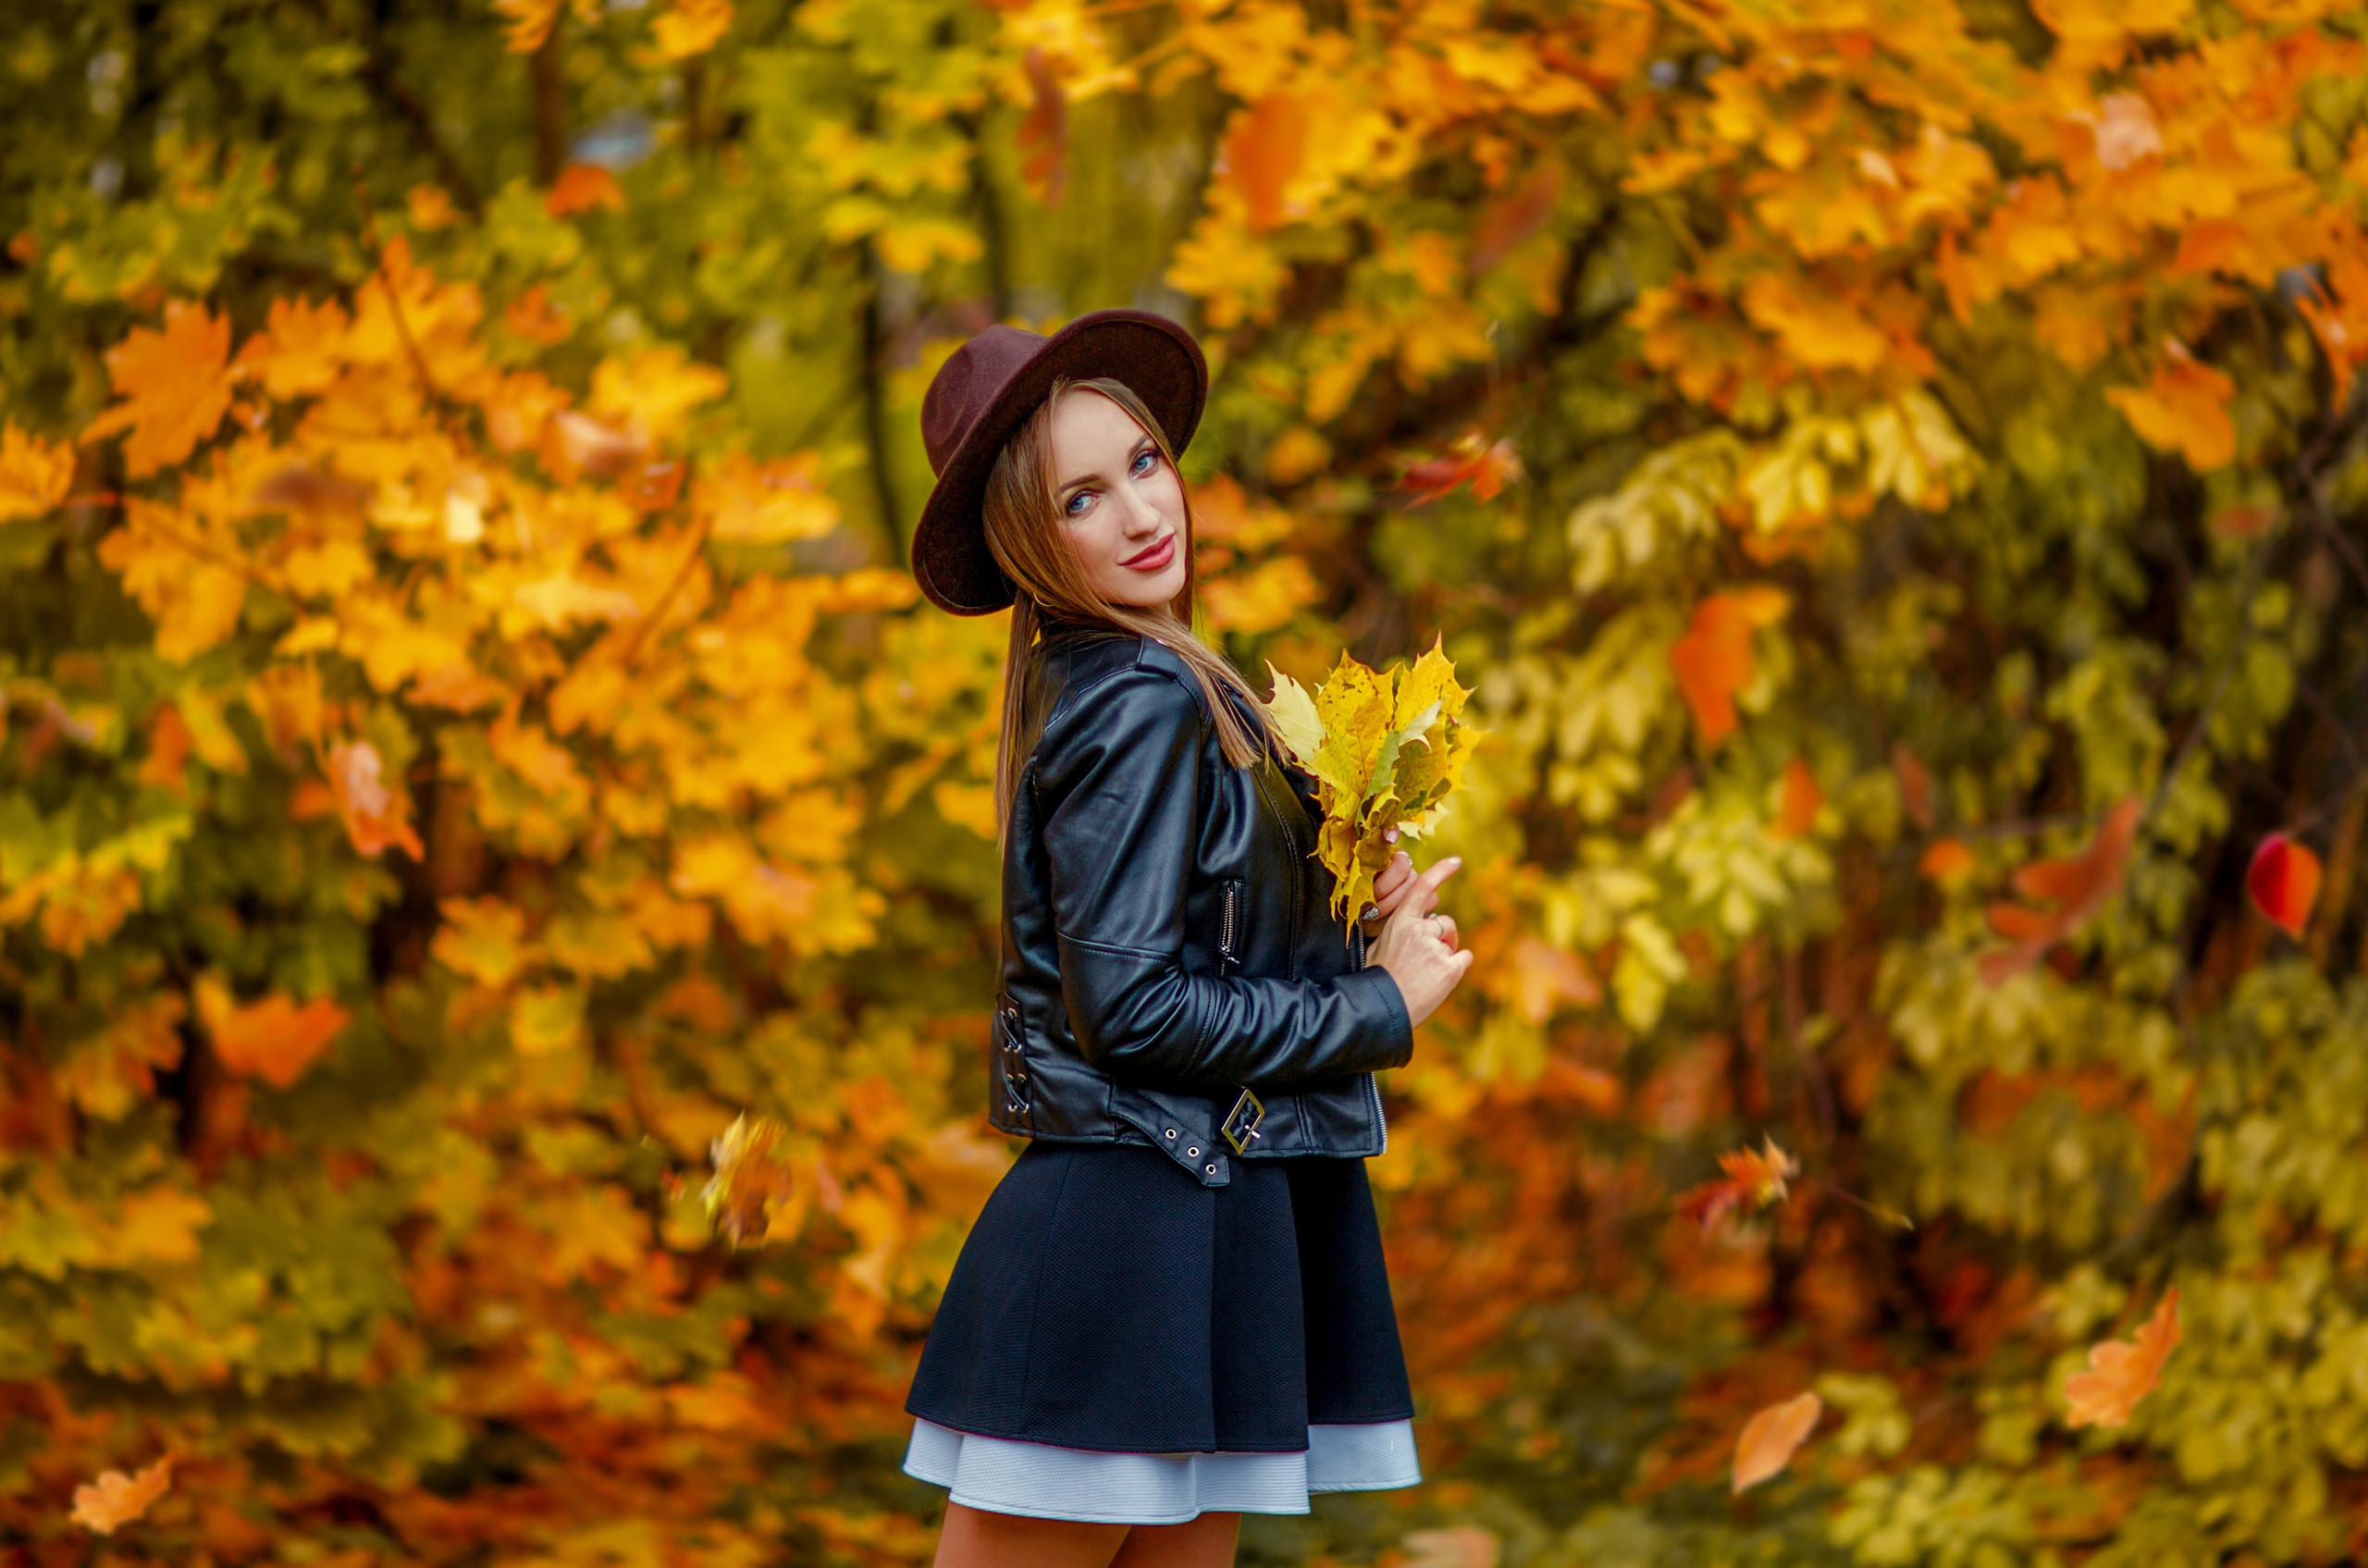 Women Model Looking At Viewer Women With Hats Hat Leather Jackets Black Jackets Dress Fall Leaves Fo 2560x1695